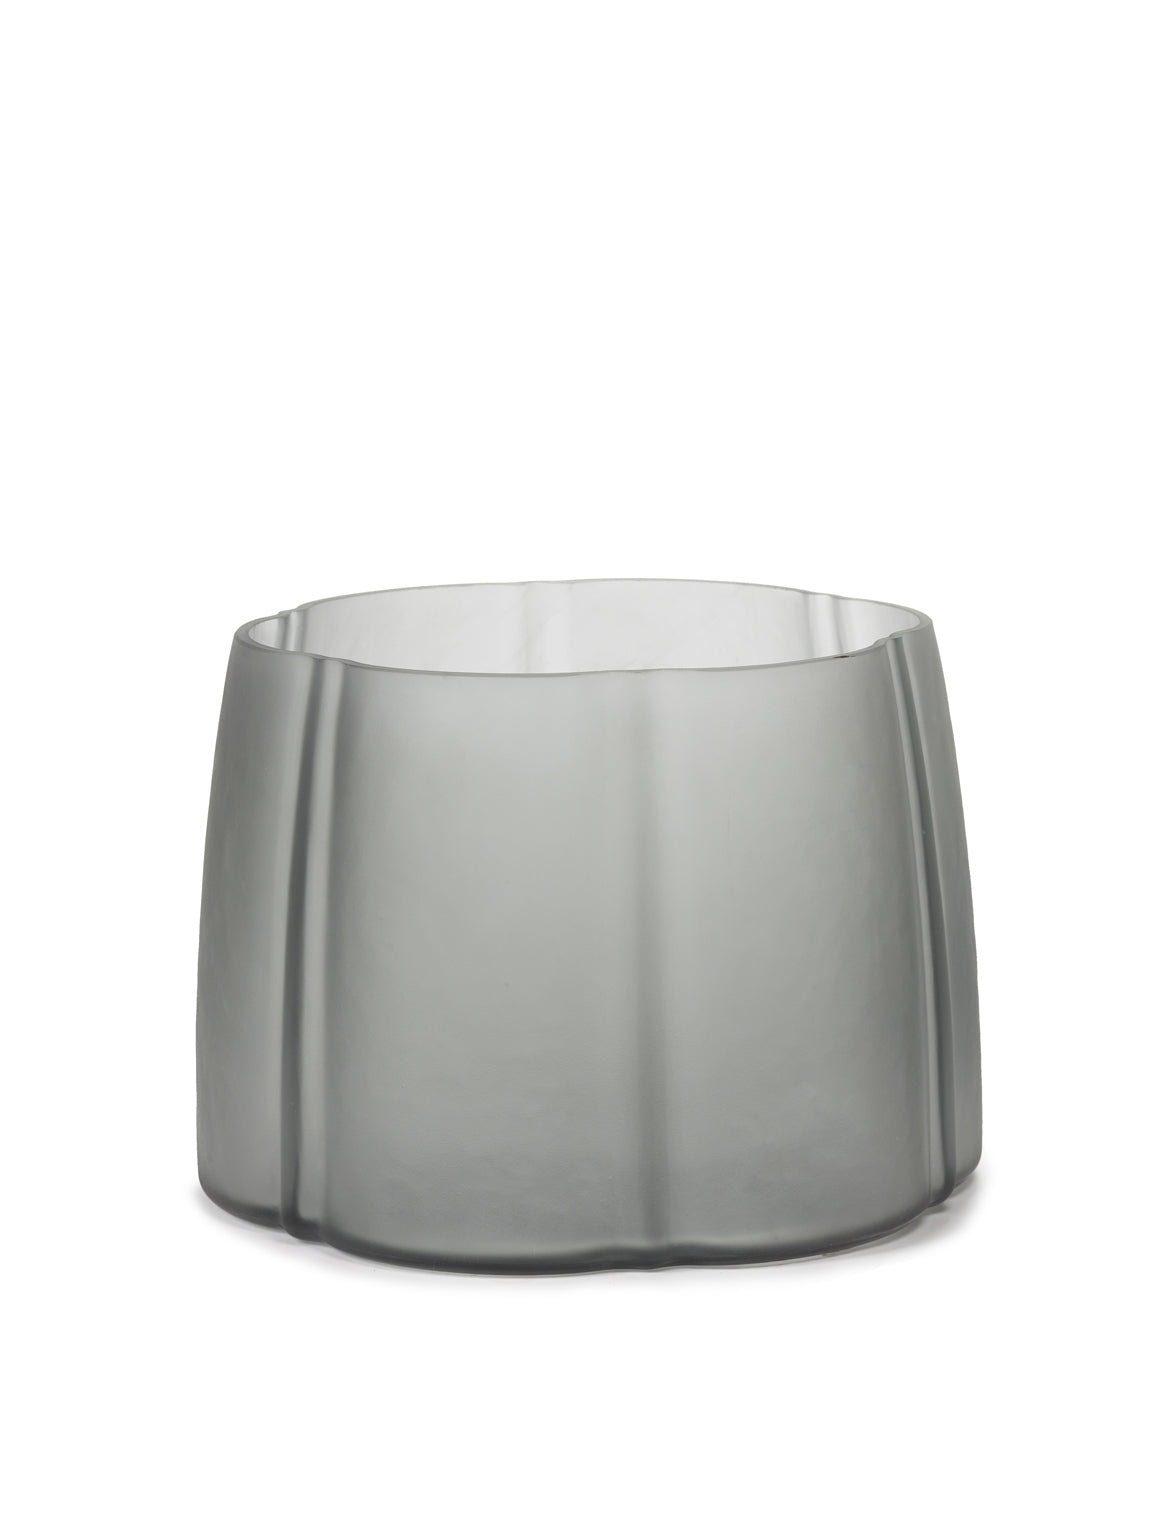 VASE GREY SHAPES BY PIET BOON - $486.00